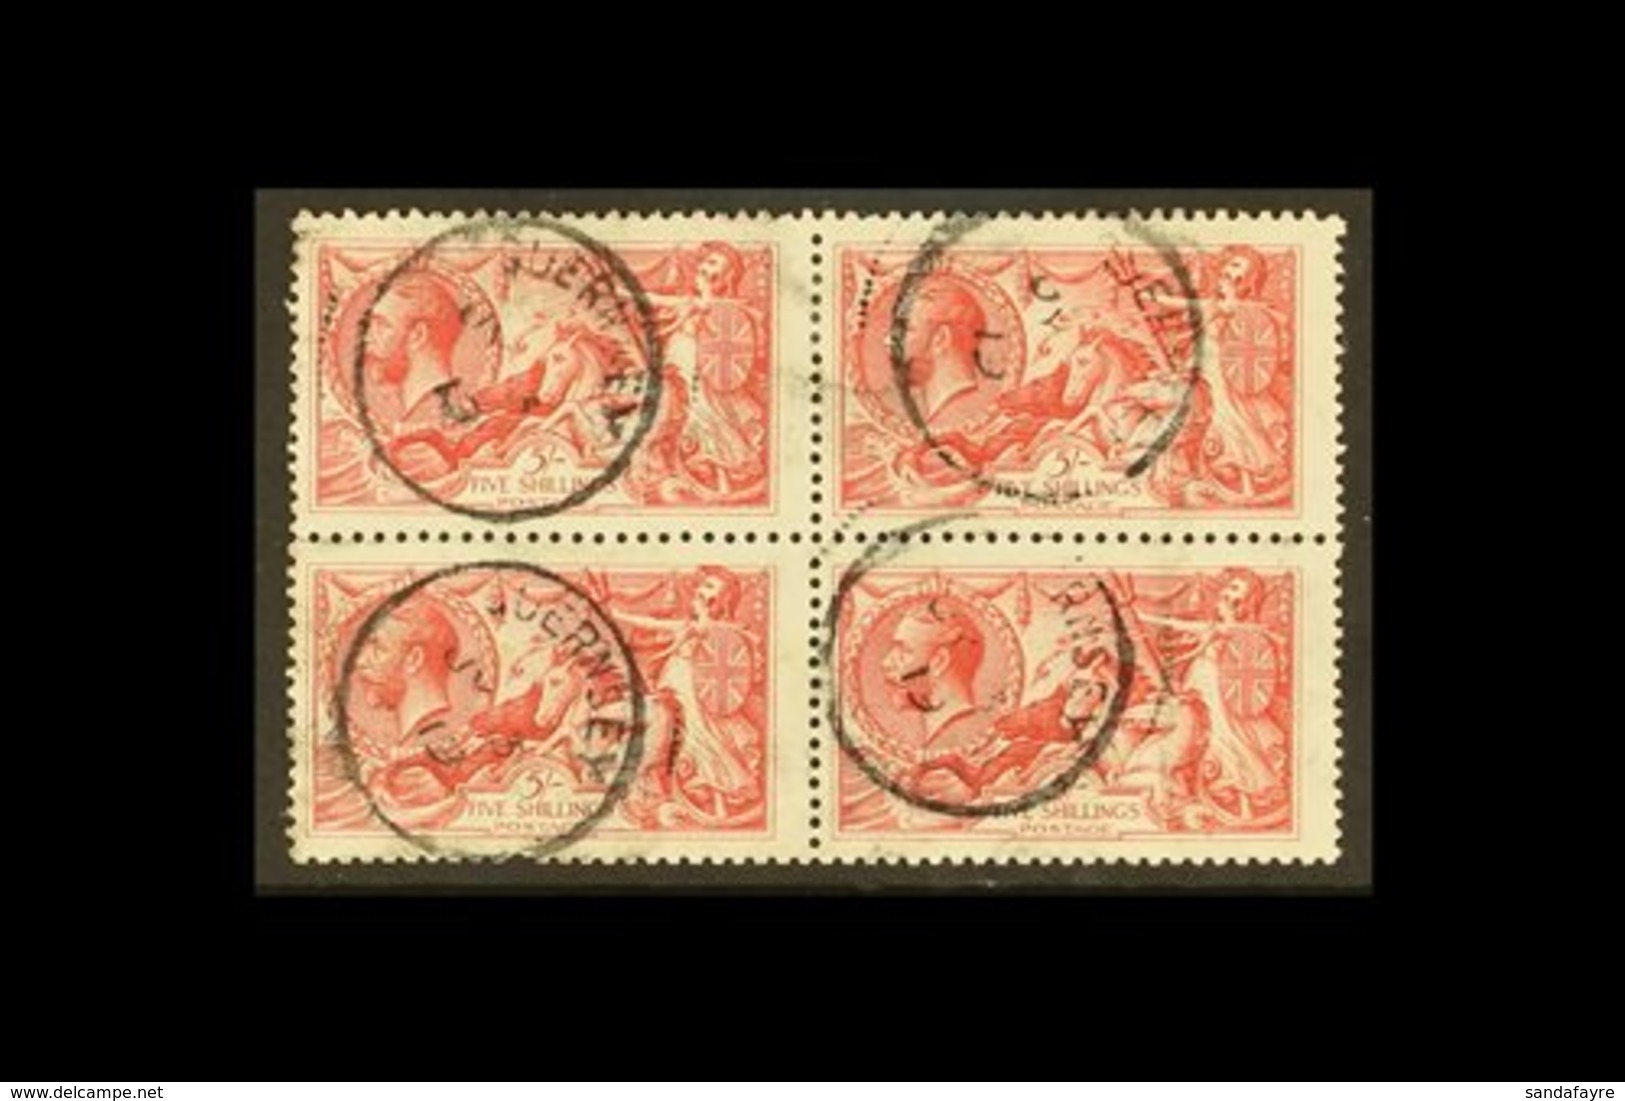 1918-19 5S SEAHORSE MULTIPLE. 5s Rose-red Seahorse, Bradbury Printing, SG 416, Good Used BLOCK OF FOUR With Guernsey, Ju - Unclassified